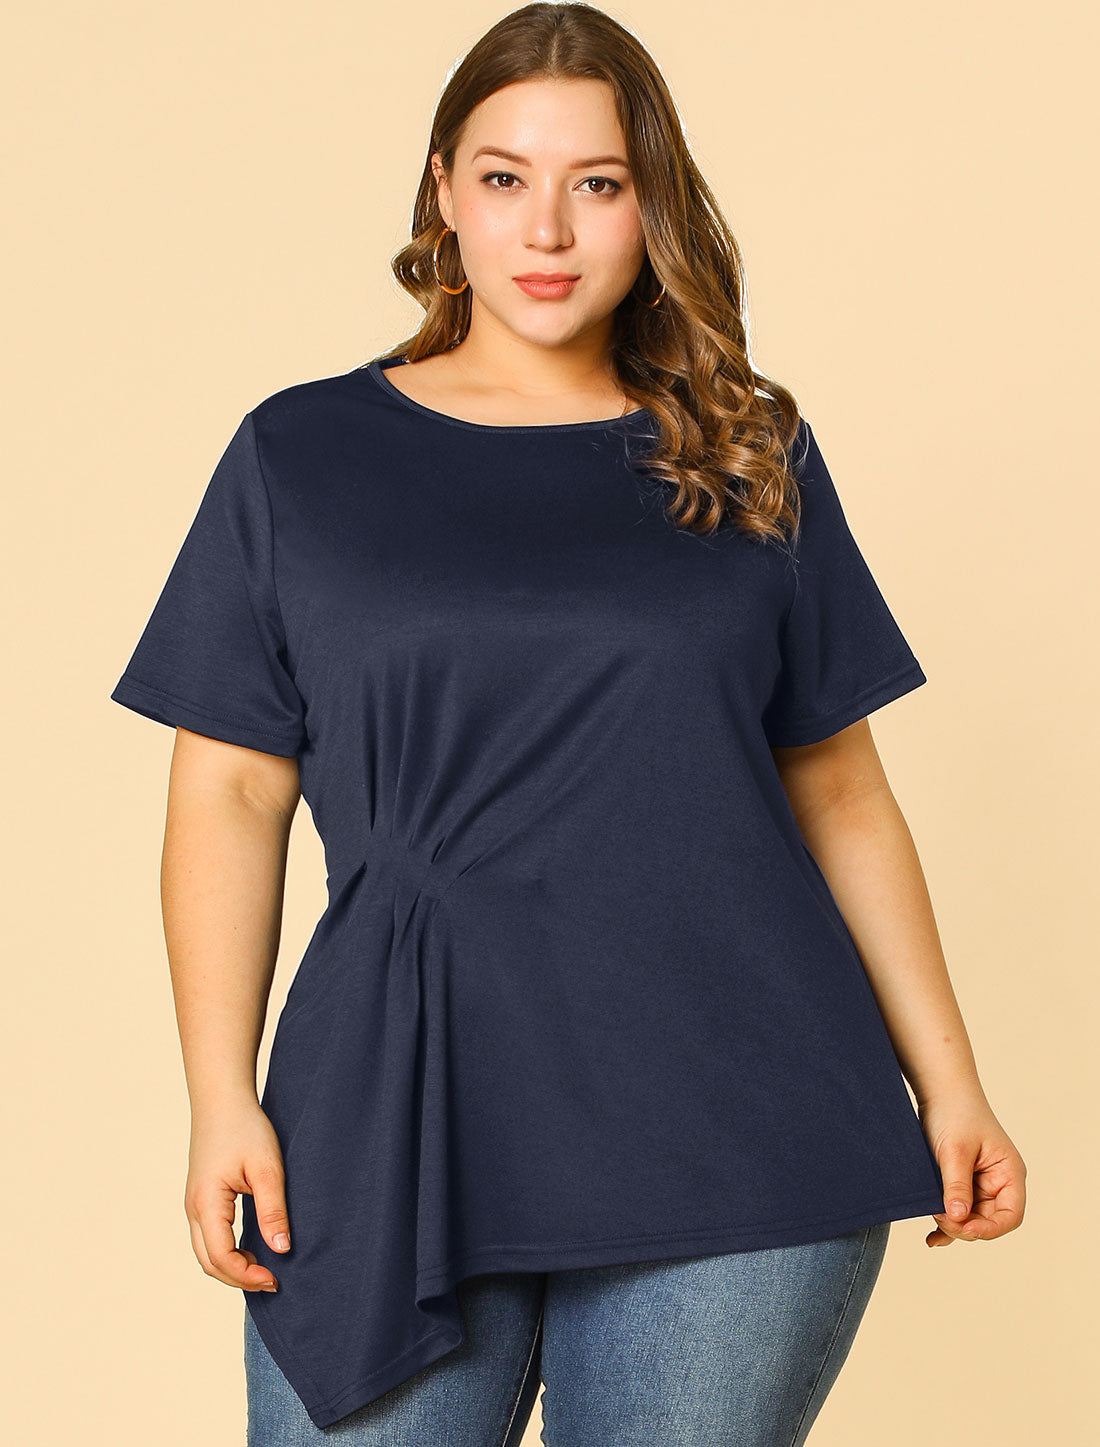 Bublédon Plus Size Top Ruched Summer Blouse Short Sleeve Casual Tops